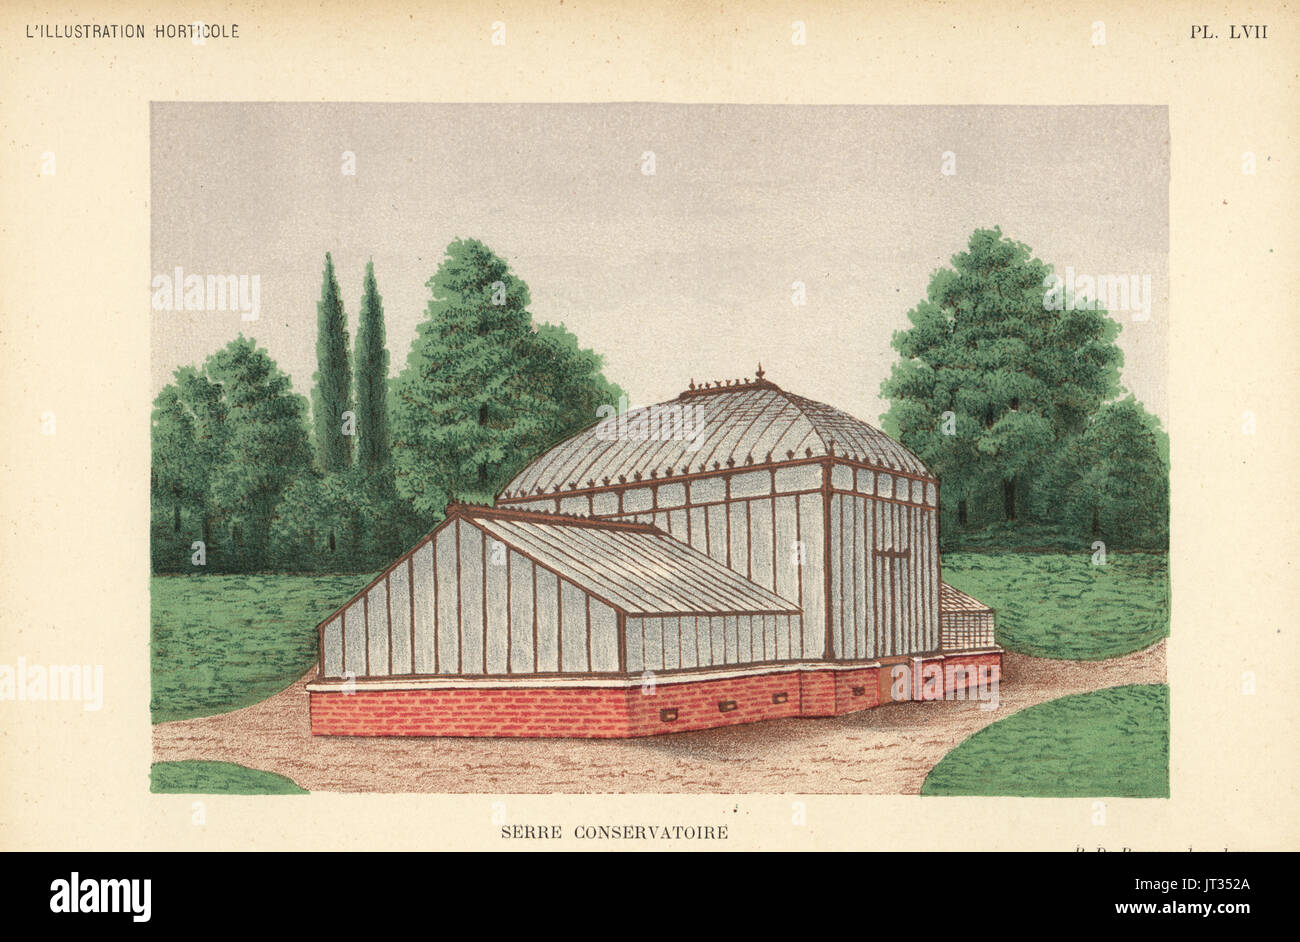 Garden architecture, greenhouse or conservatory in a park. Chromolithograph from Jean Linden's l'Illustration Horticole, Brussels, 1896. Stock Photo